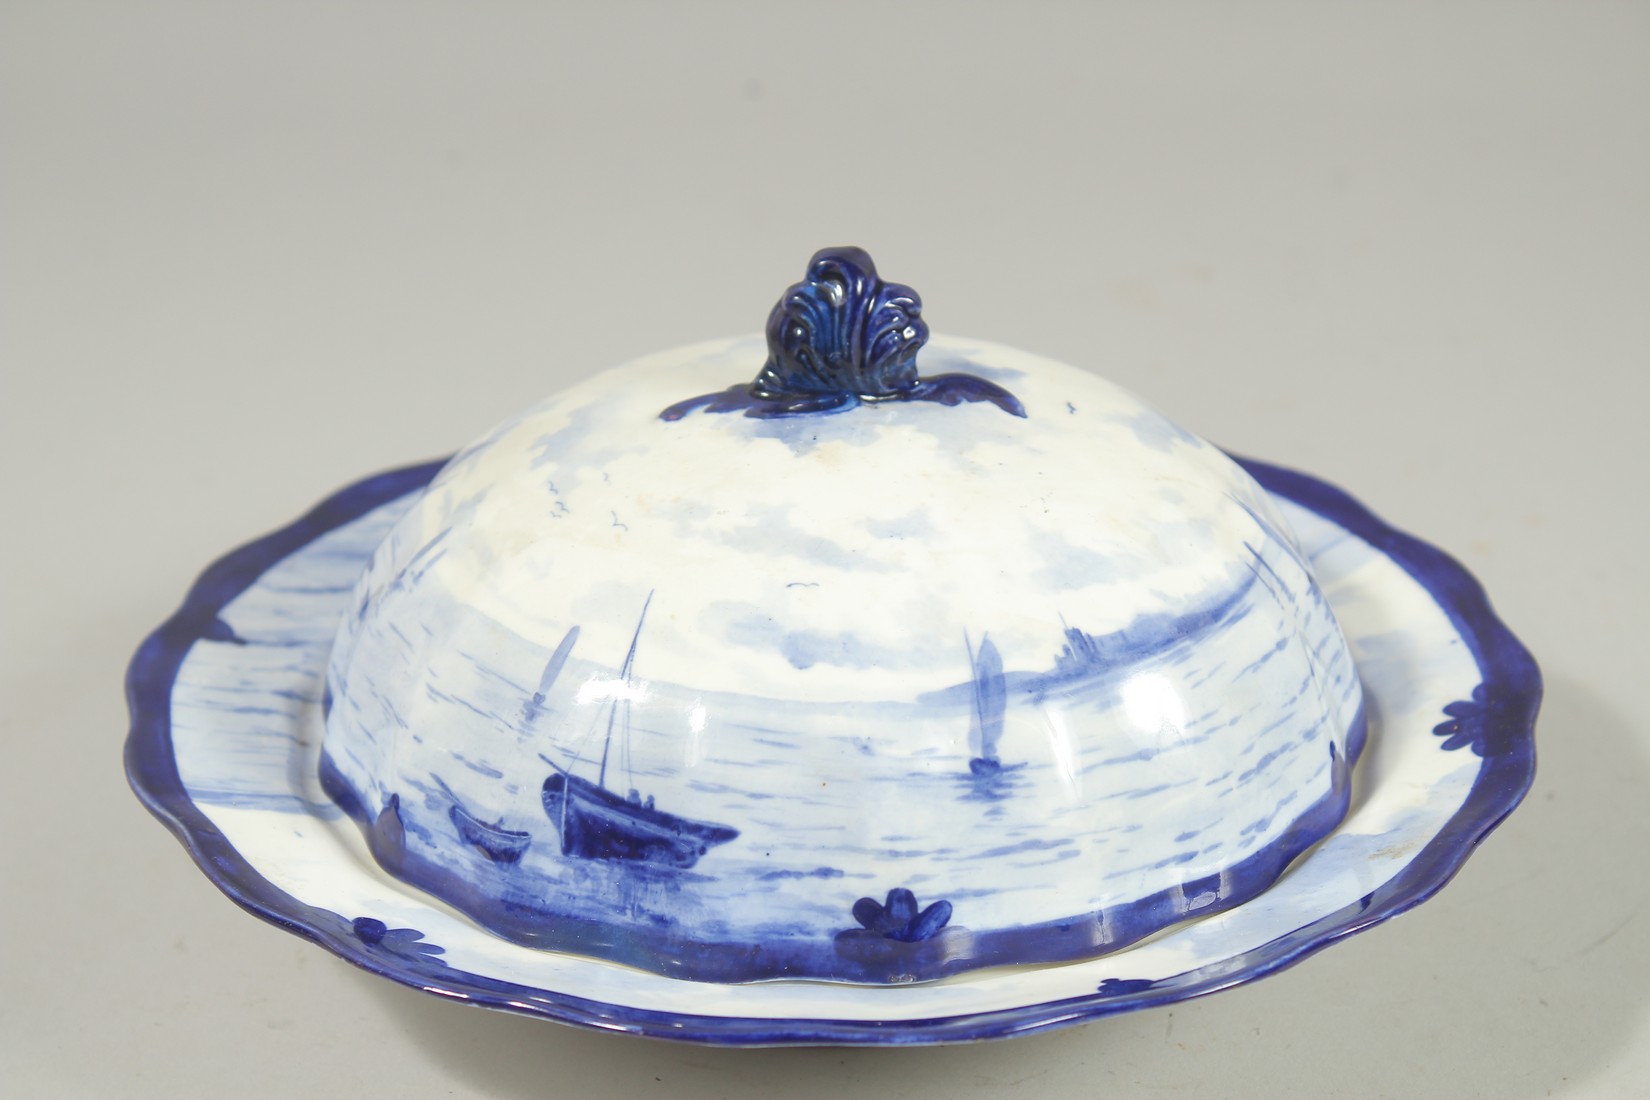 A ROYAL CROWN DERBY MUFFIN DISH AND COVER painted with sailing vessels by W.E.J. DEAN. - Image 2 of 6